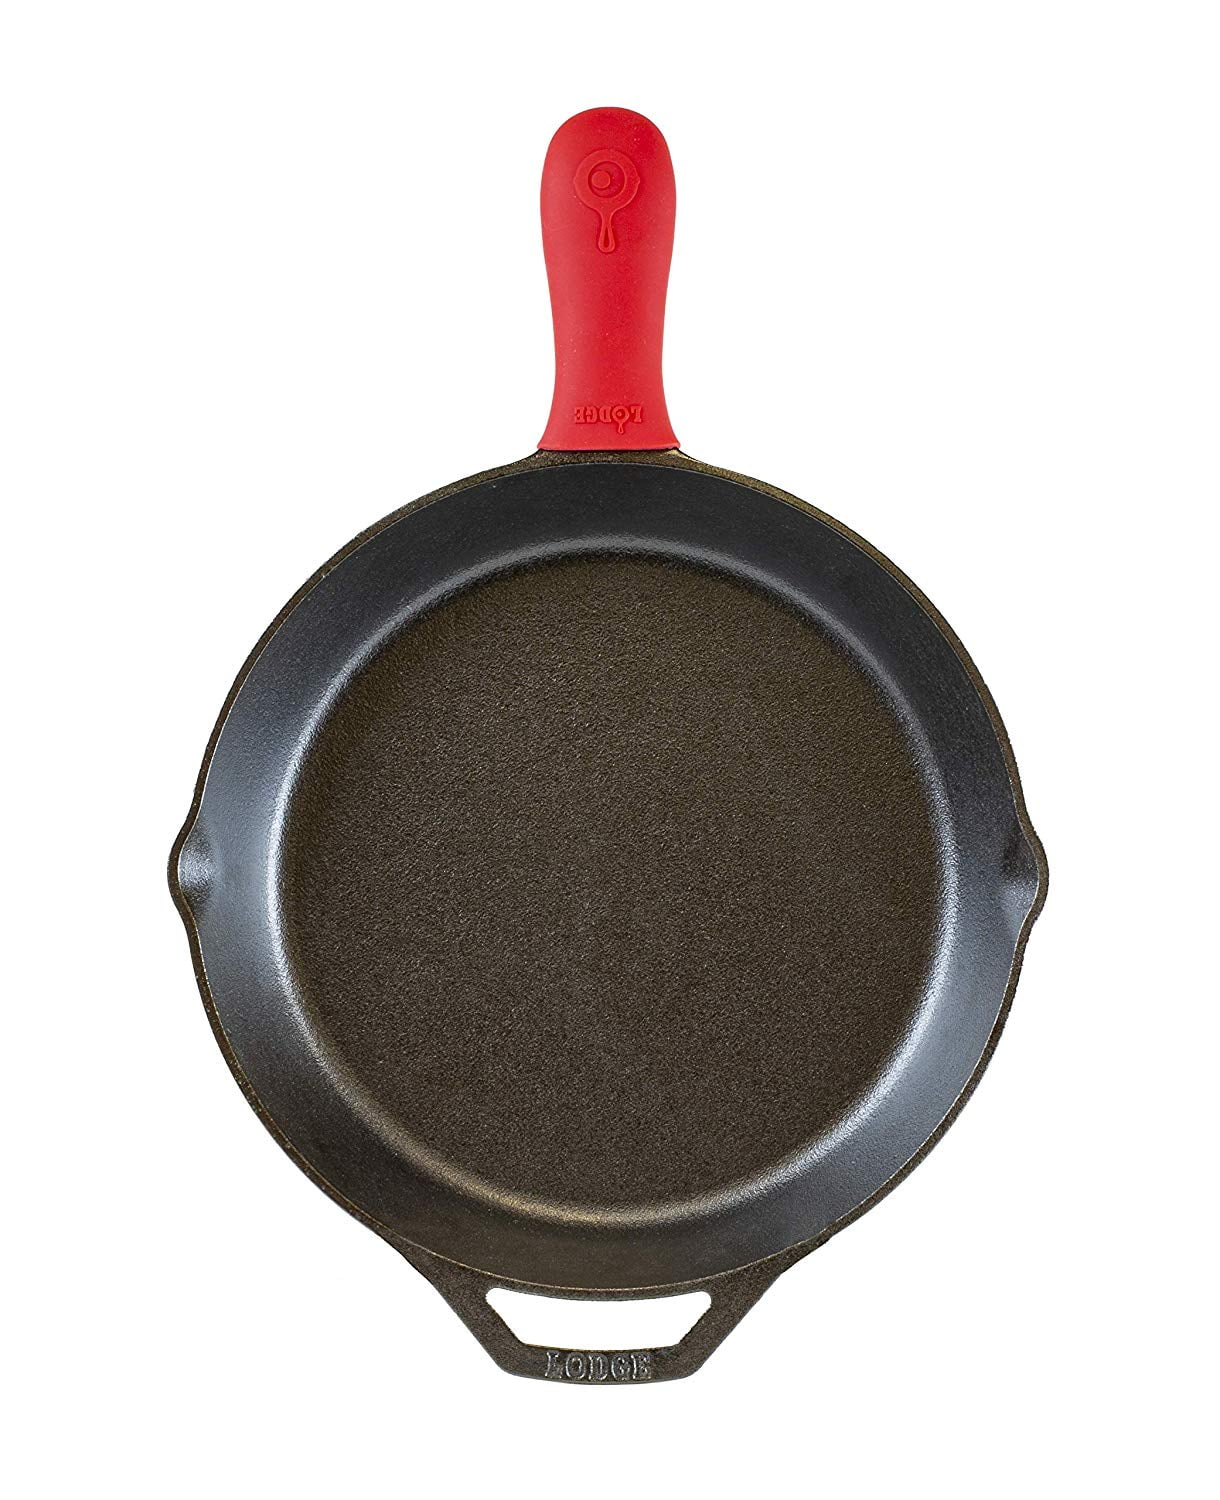 Lodge Cast Iron Deep Skillet, 12 inch & Silicone Hot Handle Holder - Red  Heat Protecting Silicone Handle for Cast Iron Skillets with Keyhole Handle